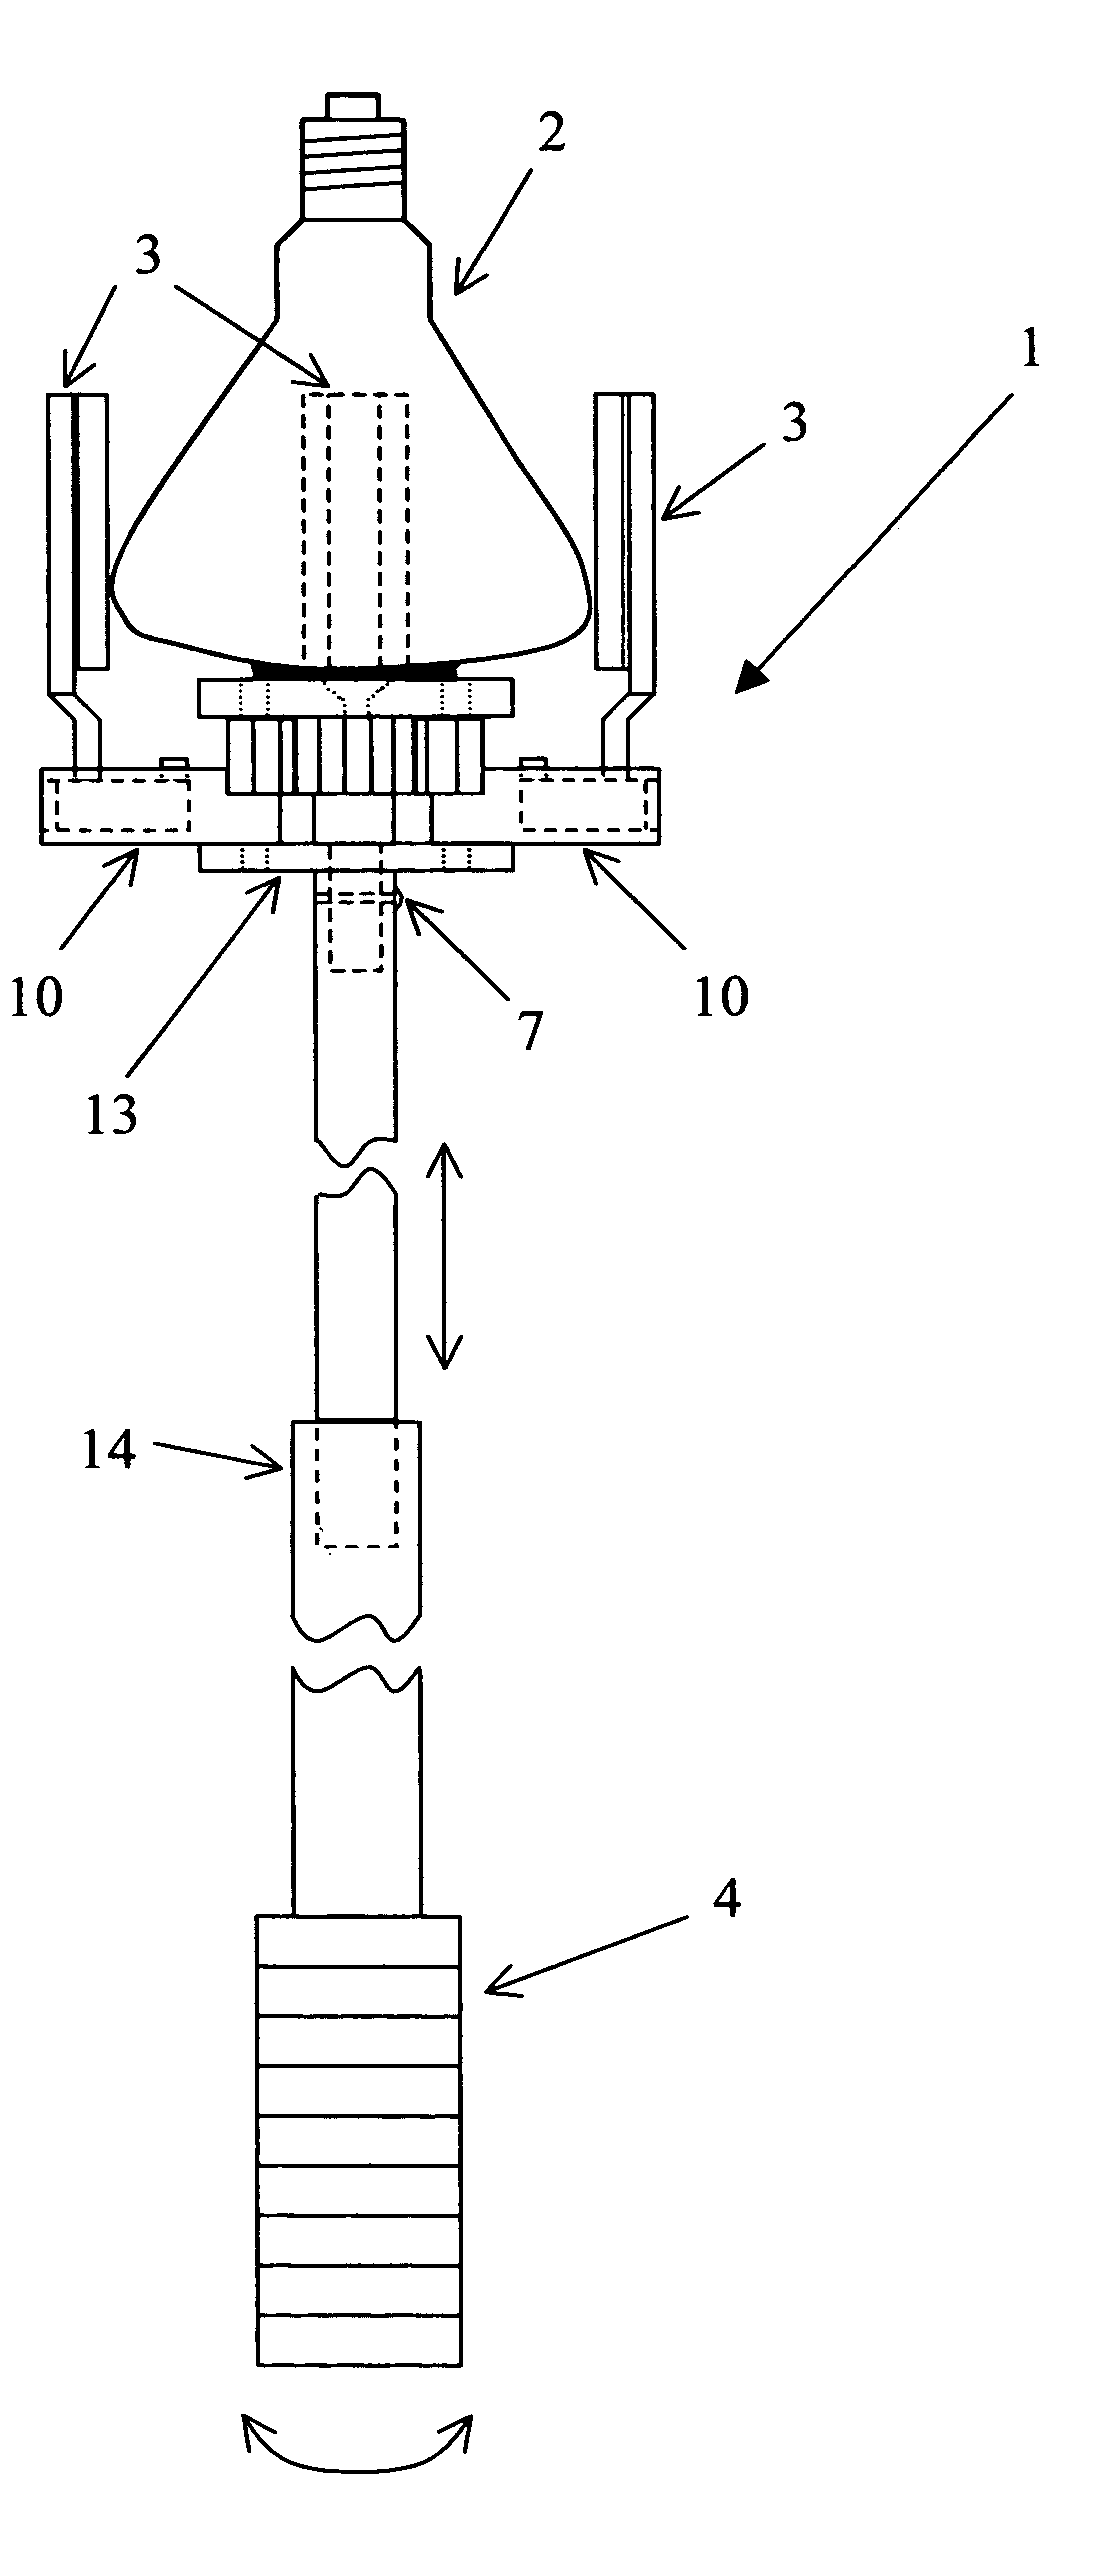 Light bulb installation and removal device